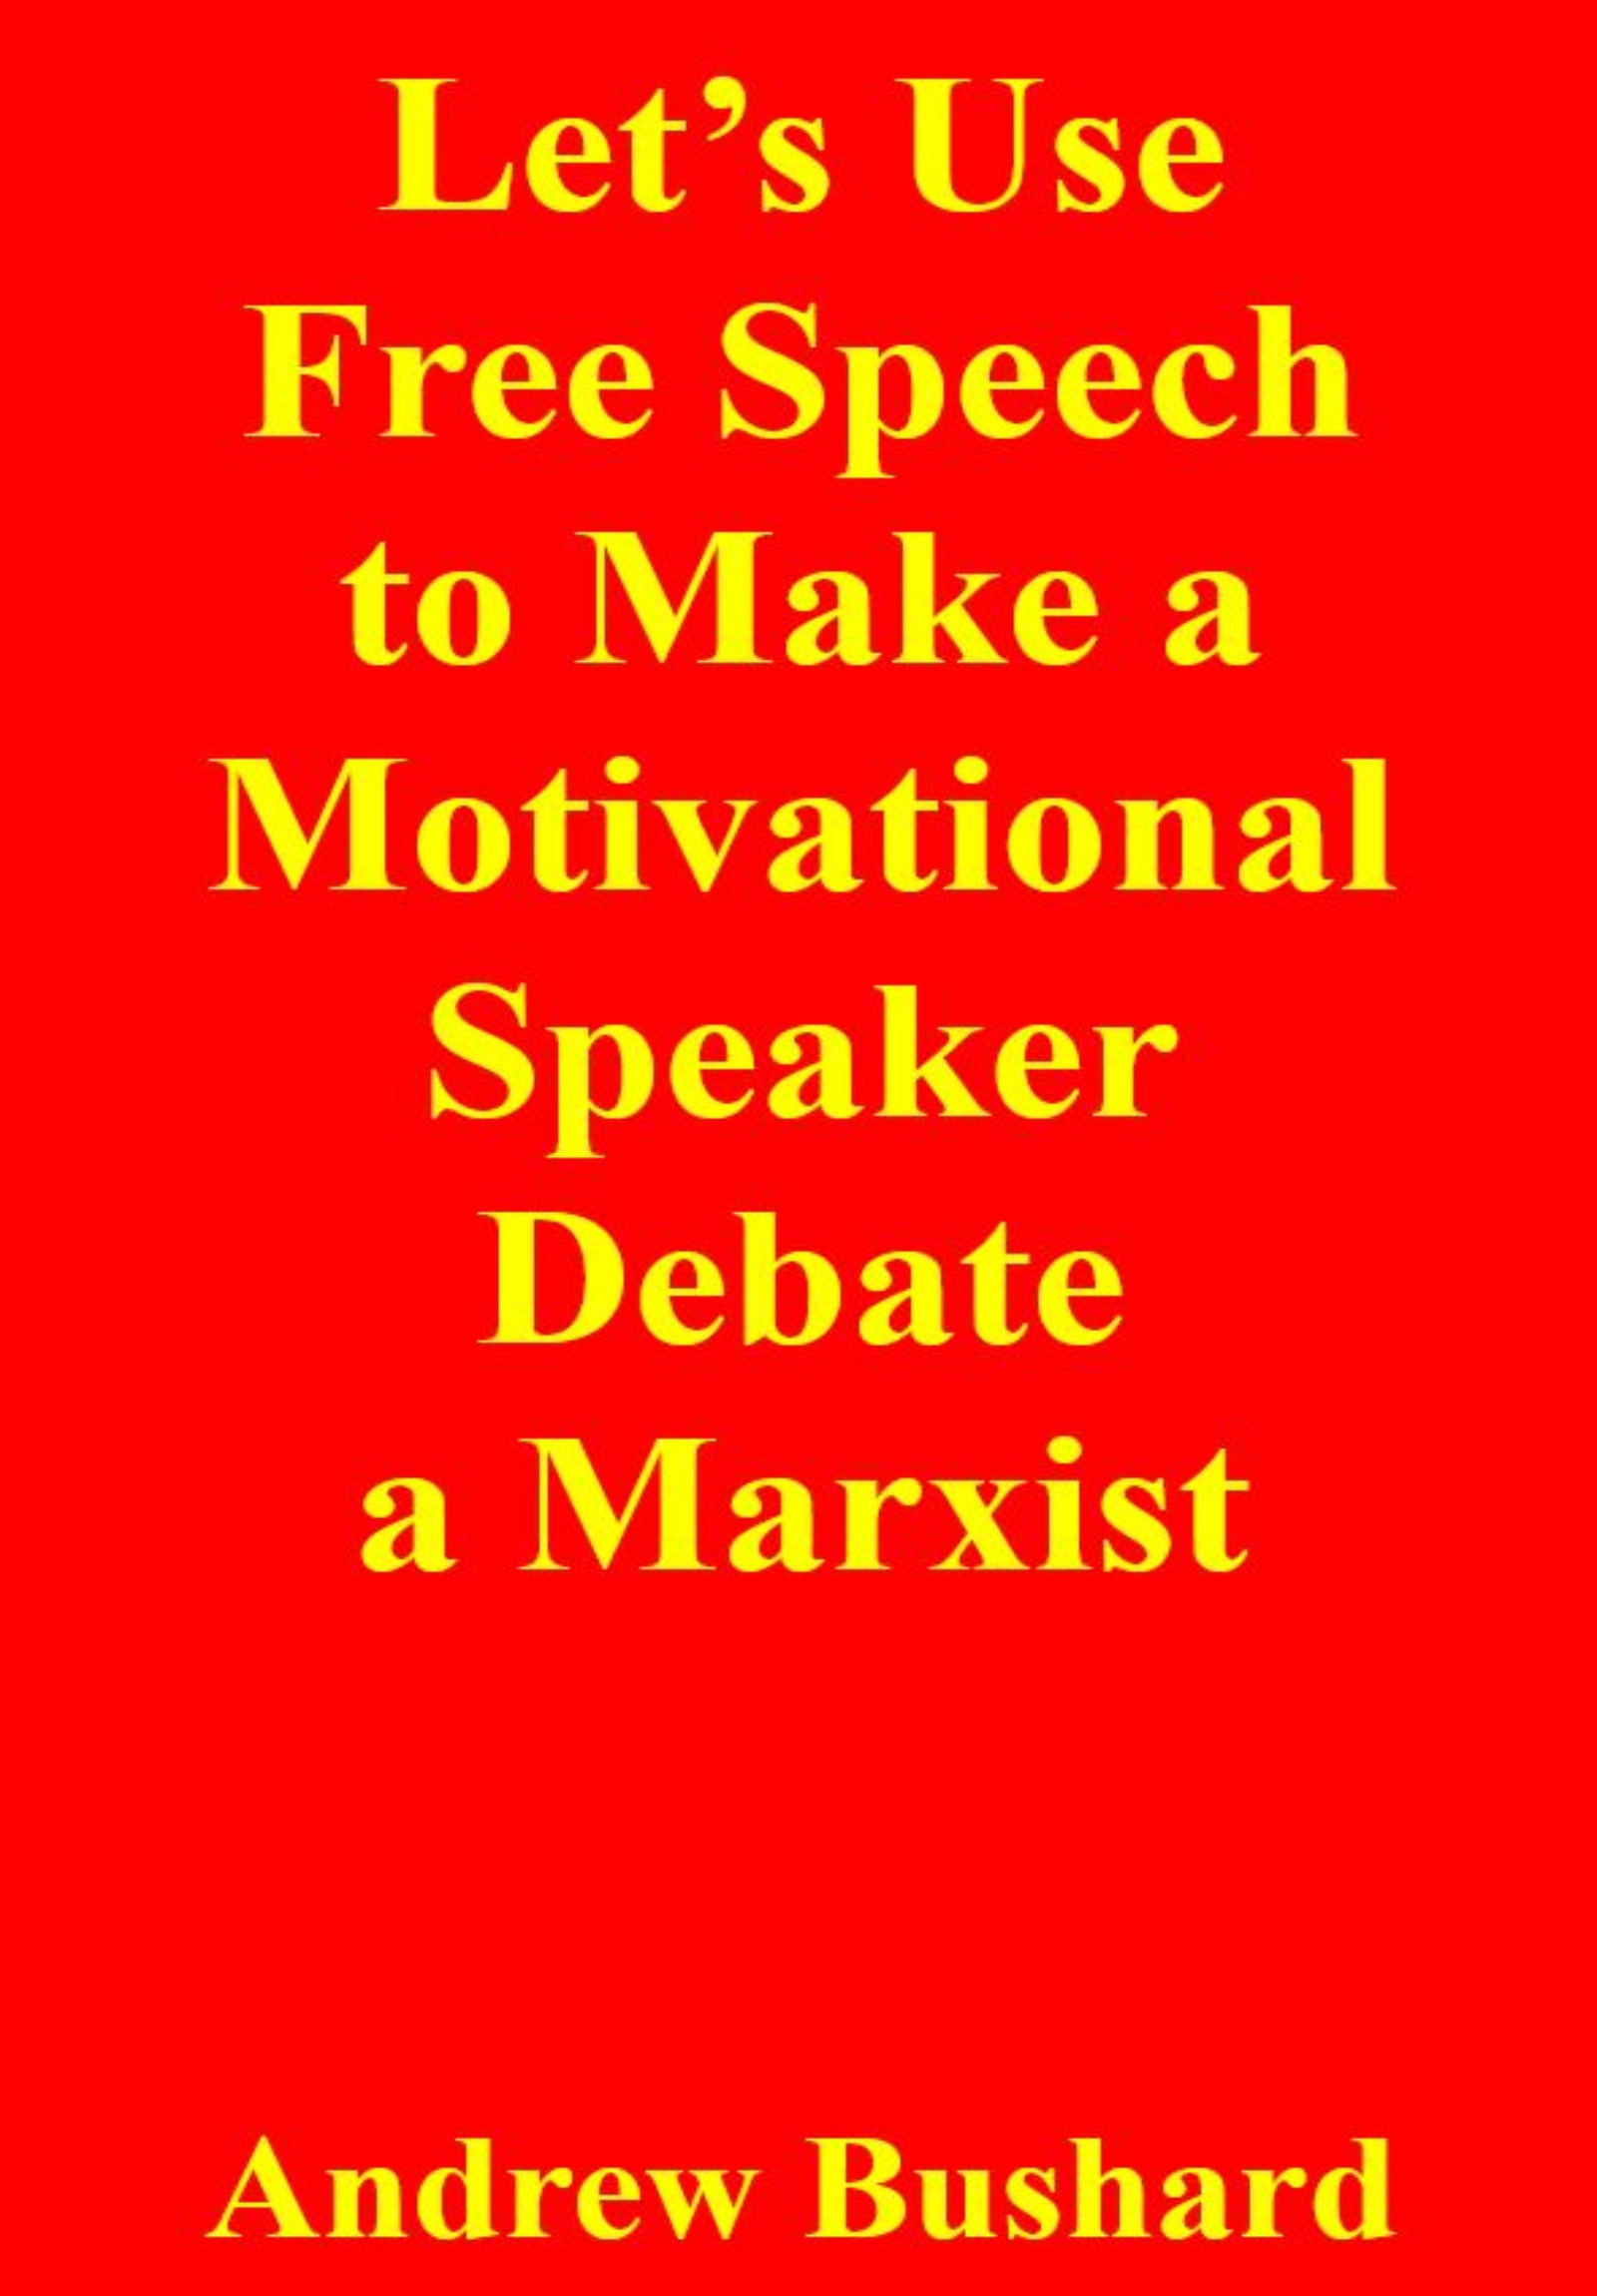 Let's Use Free Speech to Make a Motivational Speaker Debate a Marxist's featured image